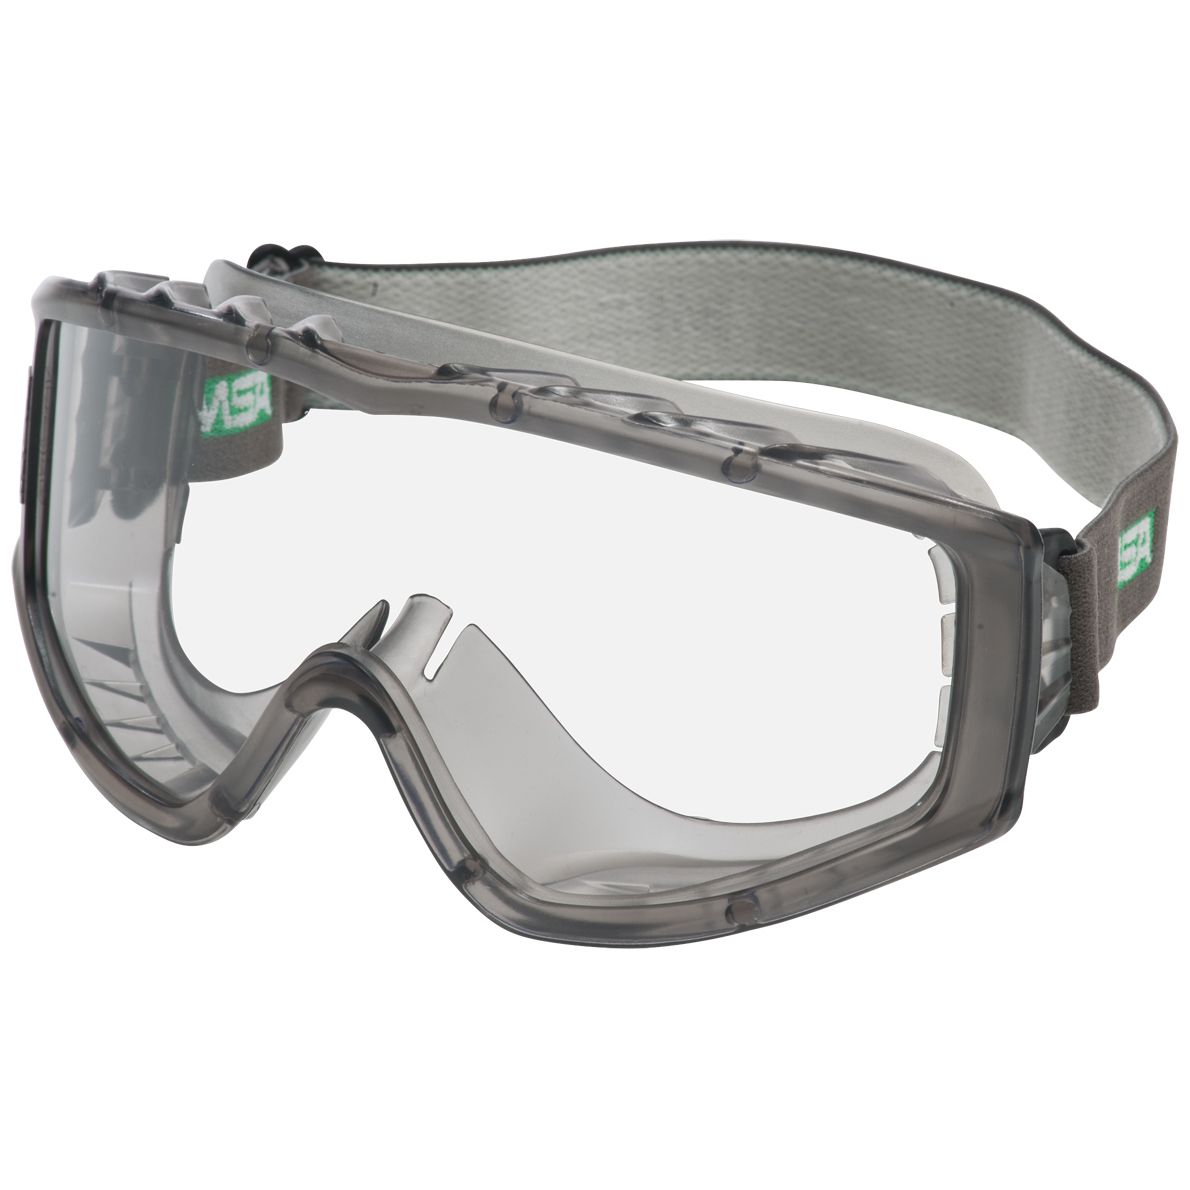 MSA FlexiChem full view safety goggles - for spectacle wearers - scratch & fog resistant - EN 166 - Grey/Clear